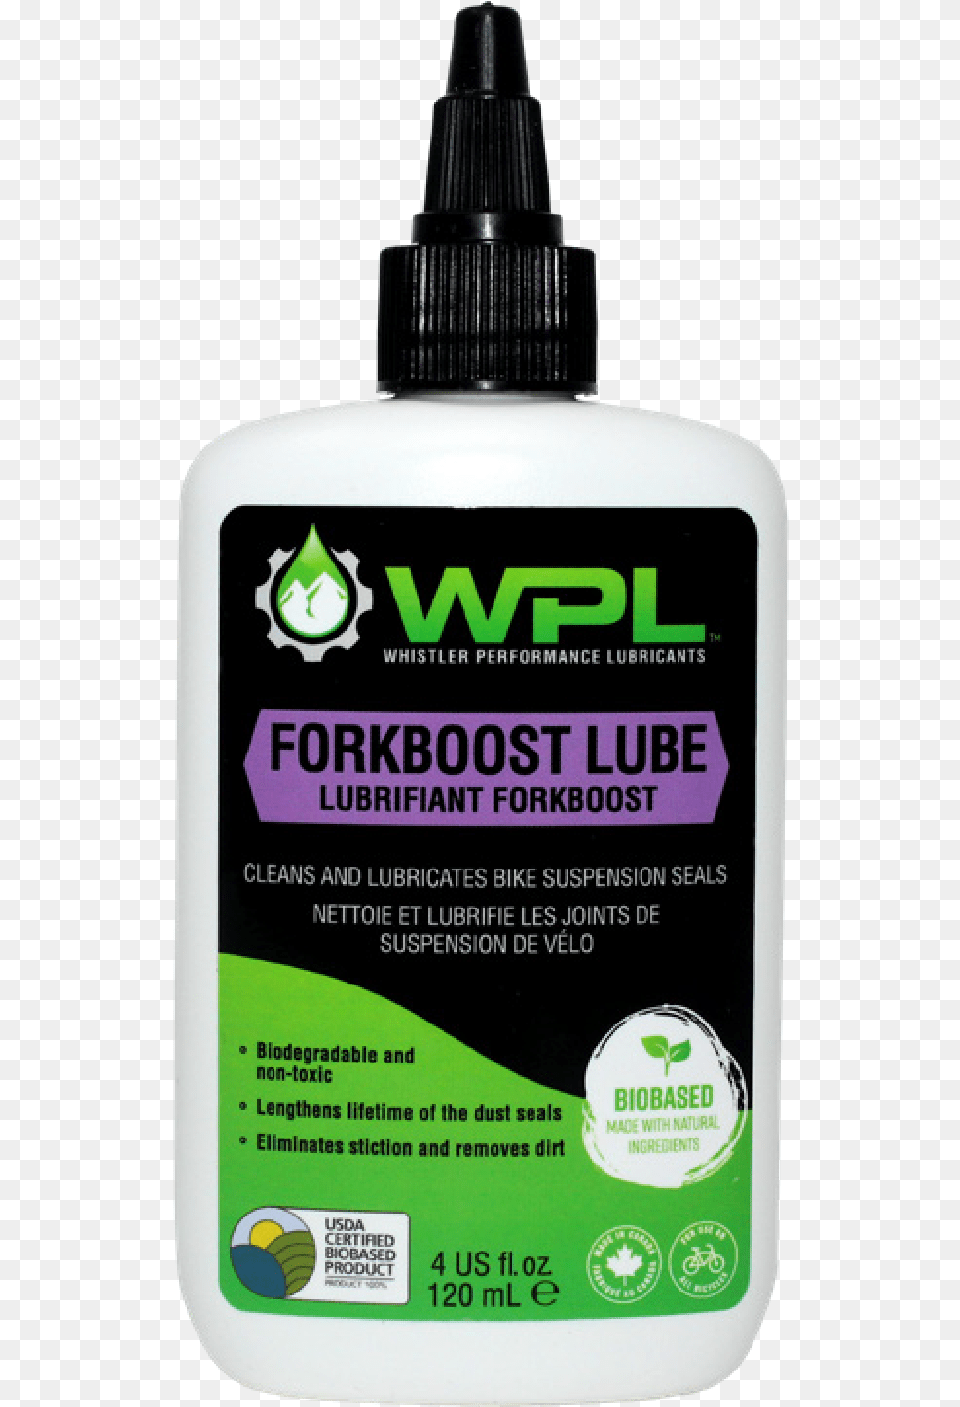 Wpl Fork Boost Lube, Bottle, Cosmetics, Perfume Free Transparent Png